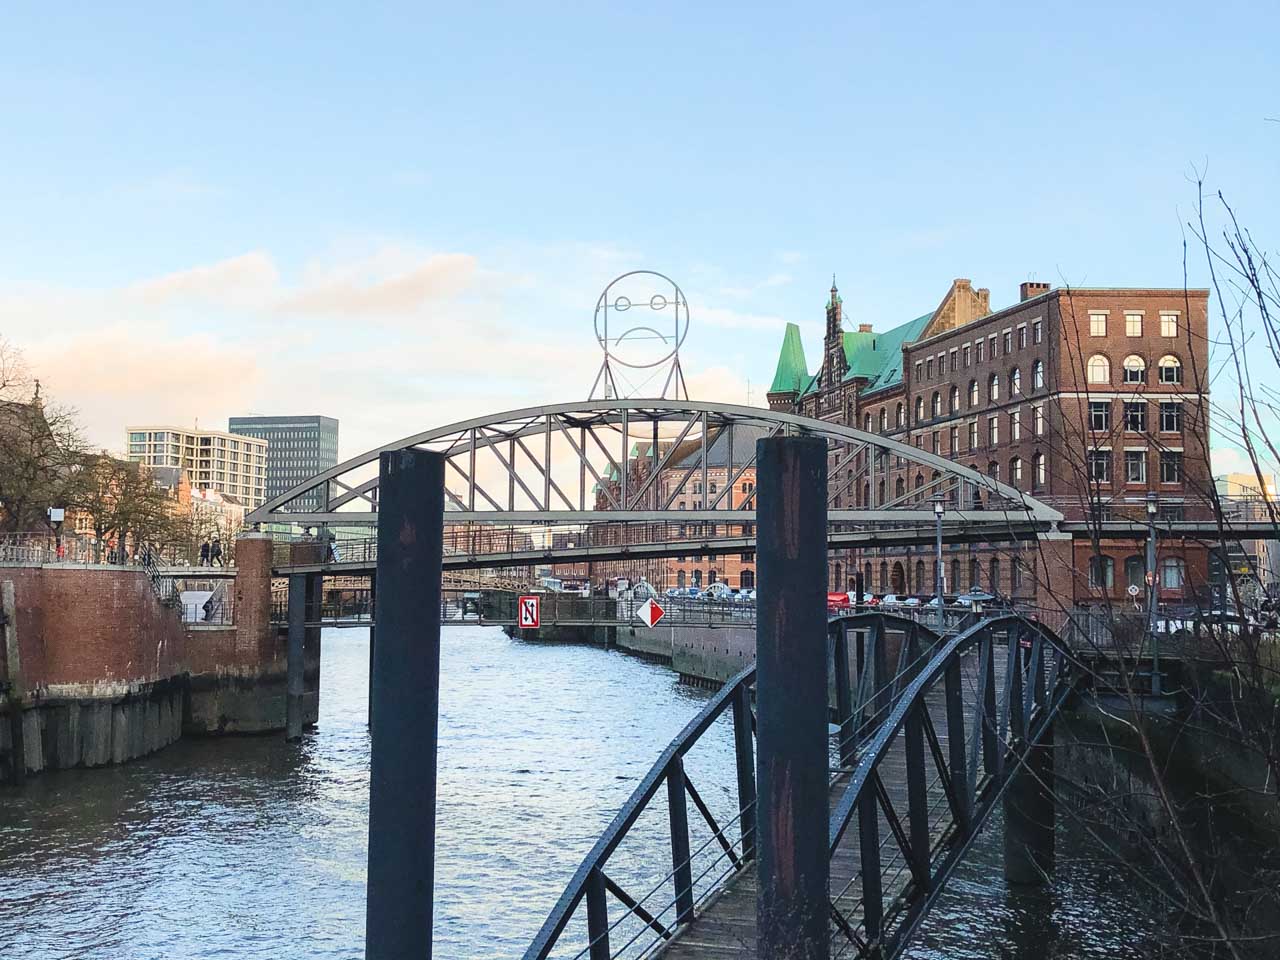 A bridge in Hamburg, Germany with a sad face on top